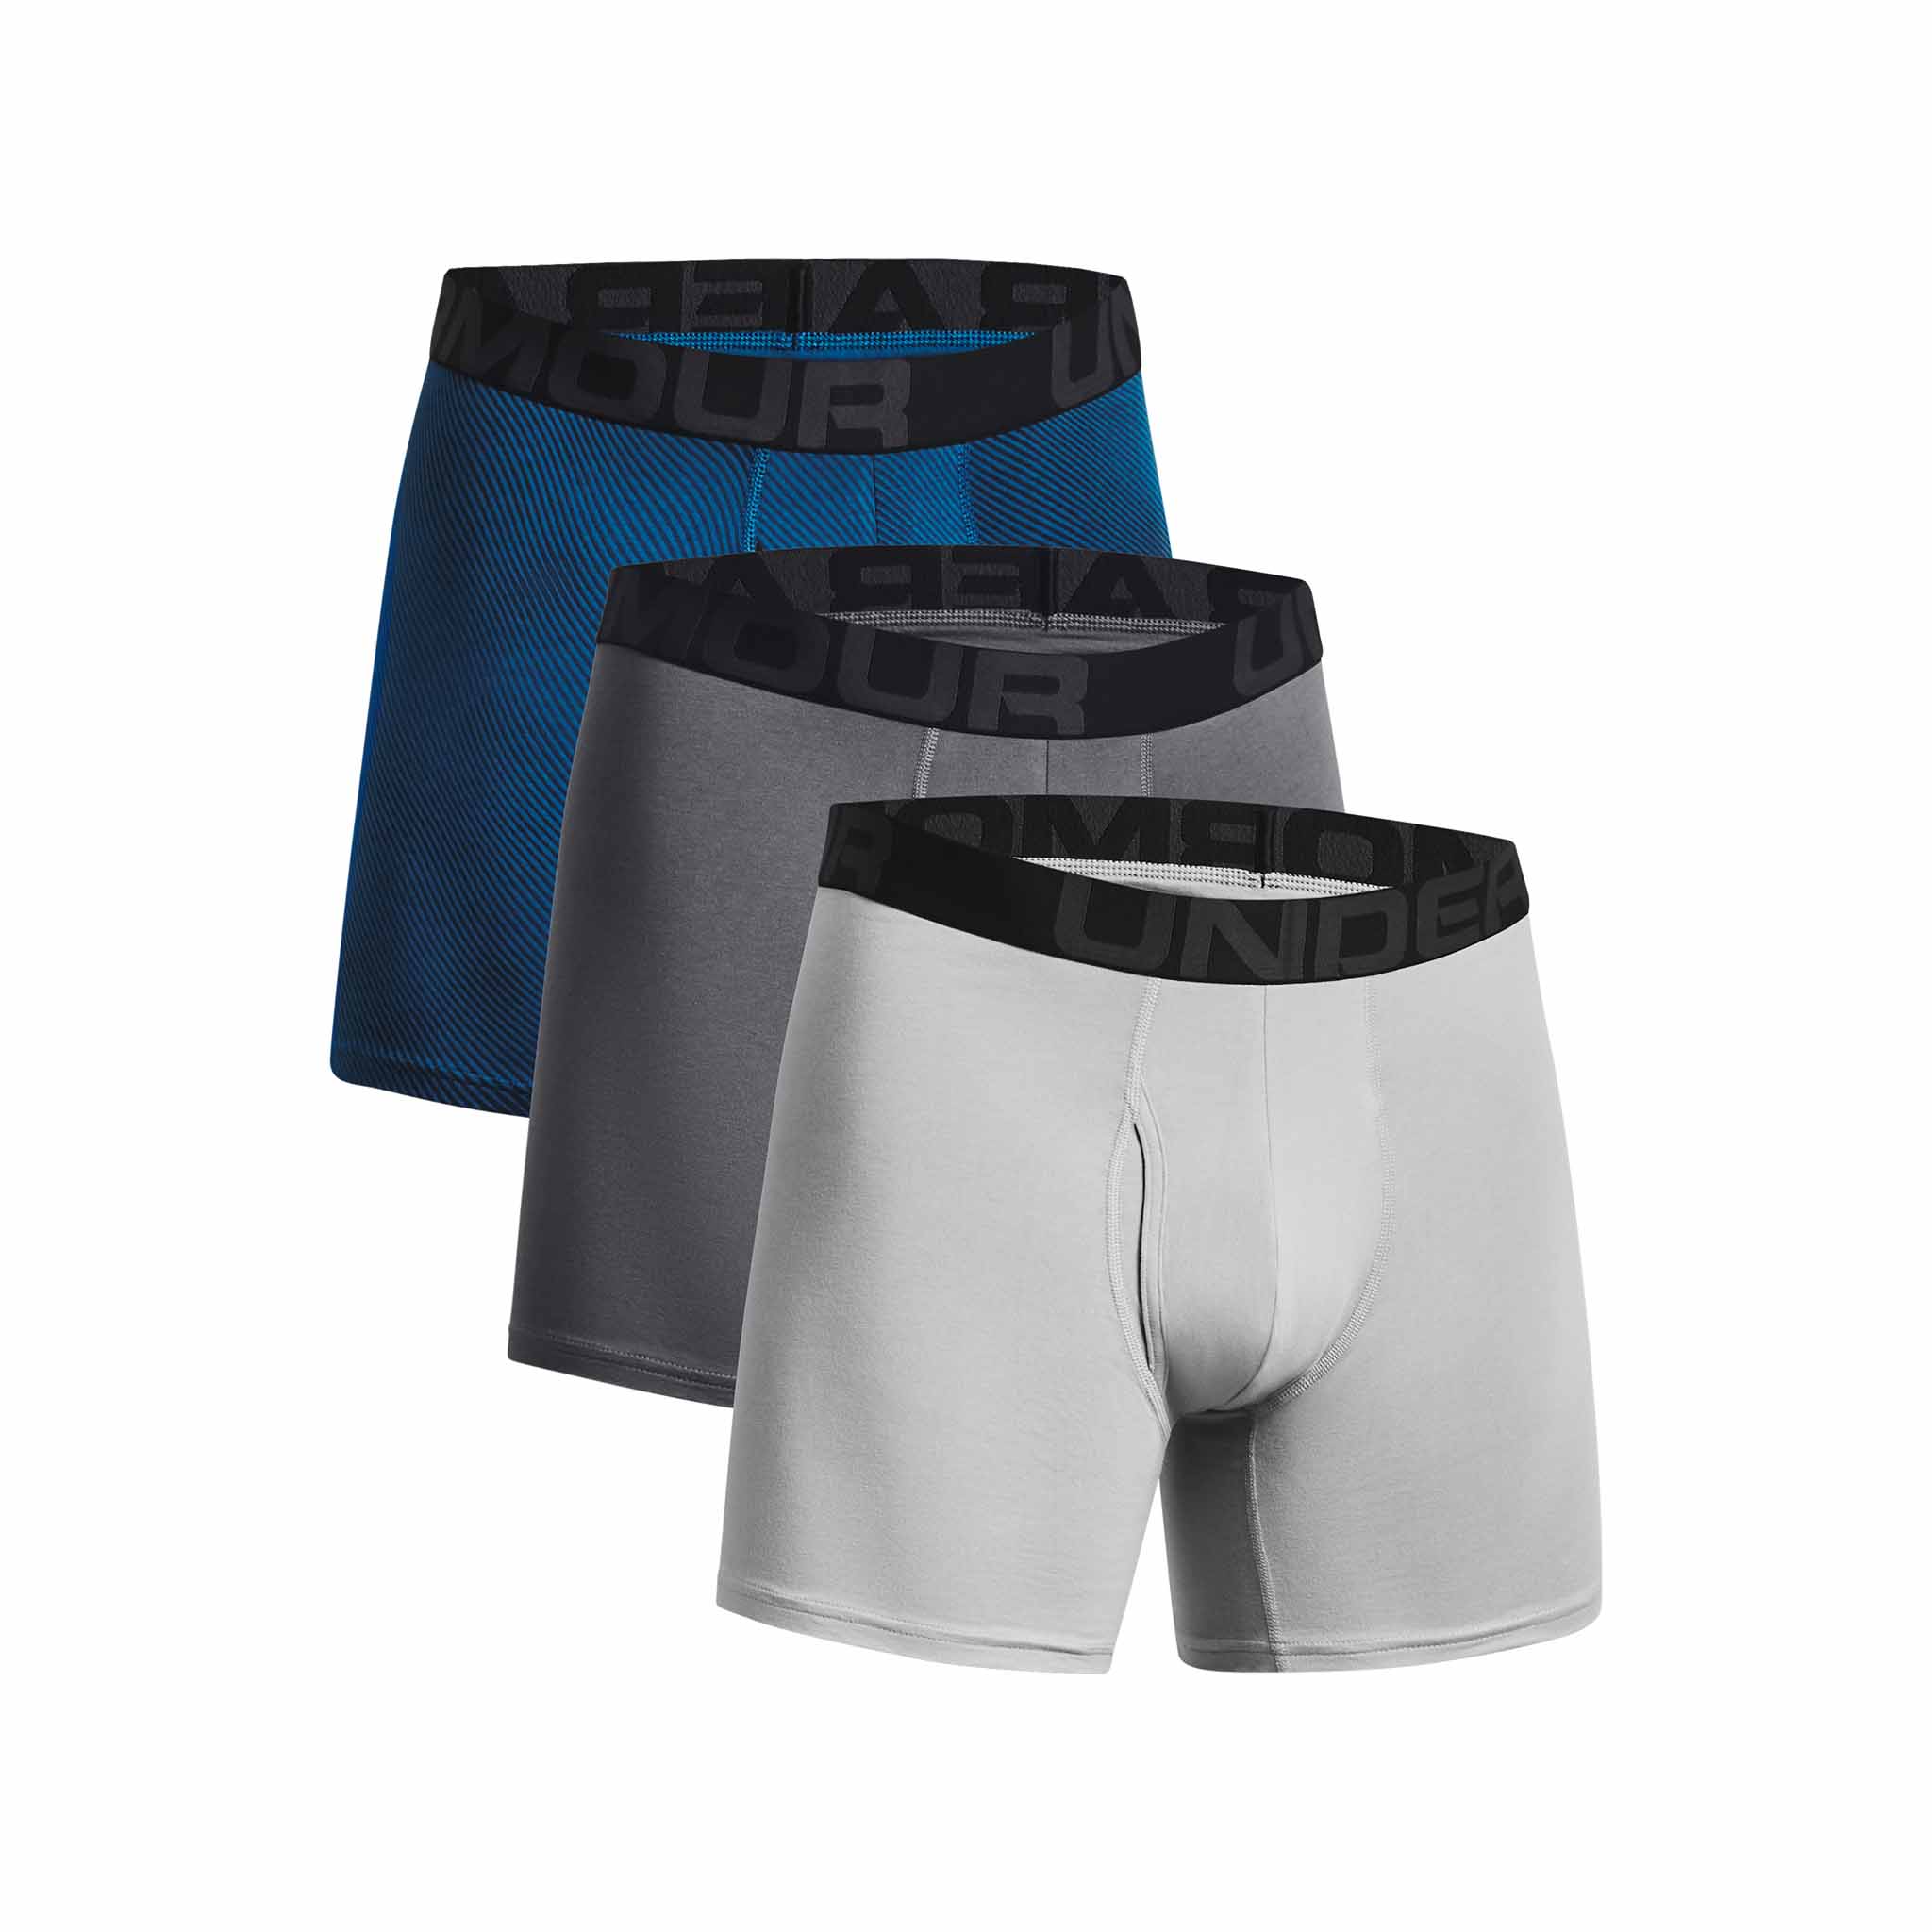  Under Armour Mens Charged Cotton 6-inch Boxerjock 3